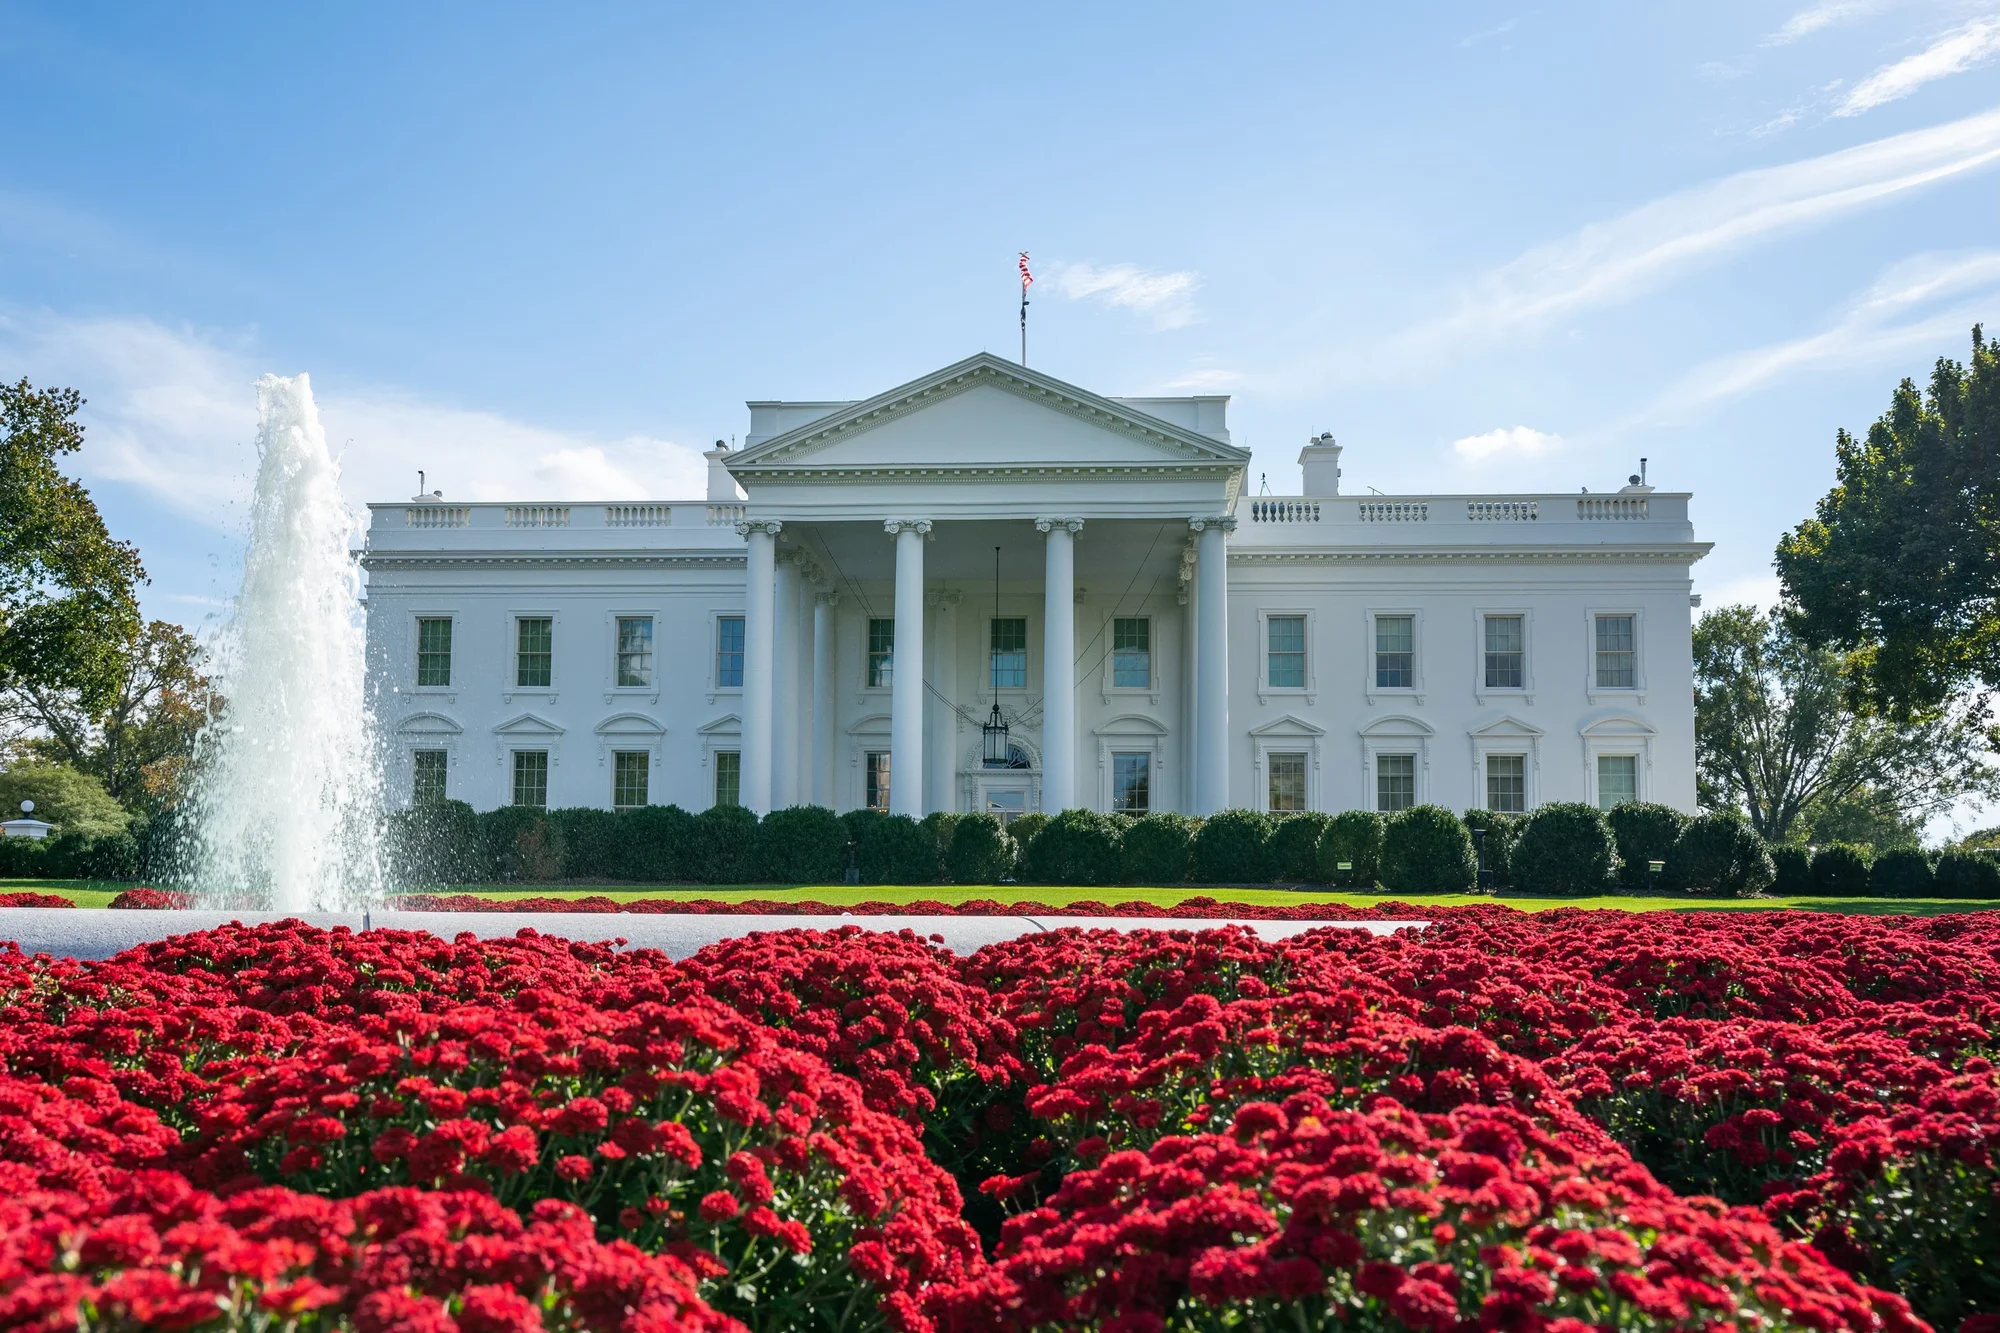 A color photograph of the White House’s front view. It is day time and the sky is blue. The water flows out of the fountain in the front, in this image, found on the left. Green bushes surround the front lawn of the White House, and to the side, there are green trees. Across from the bushes are a large garden of red flowers.